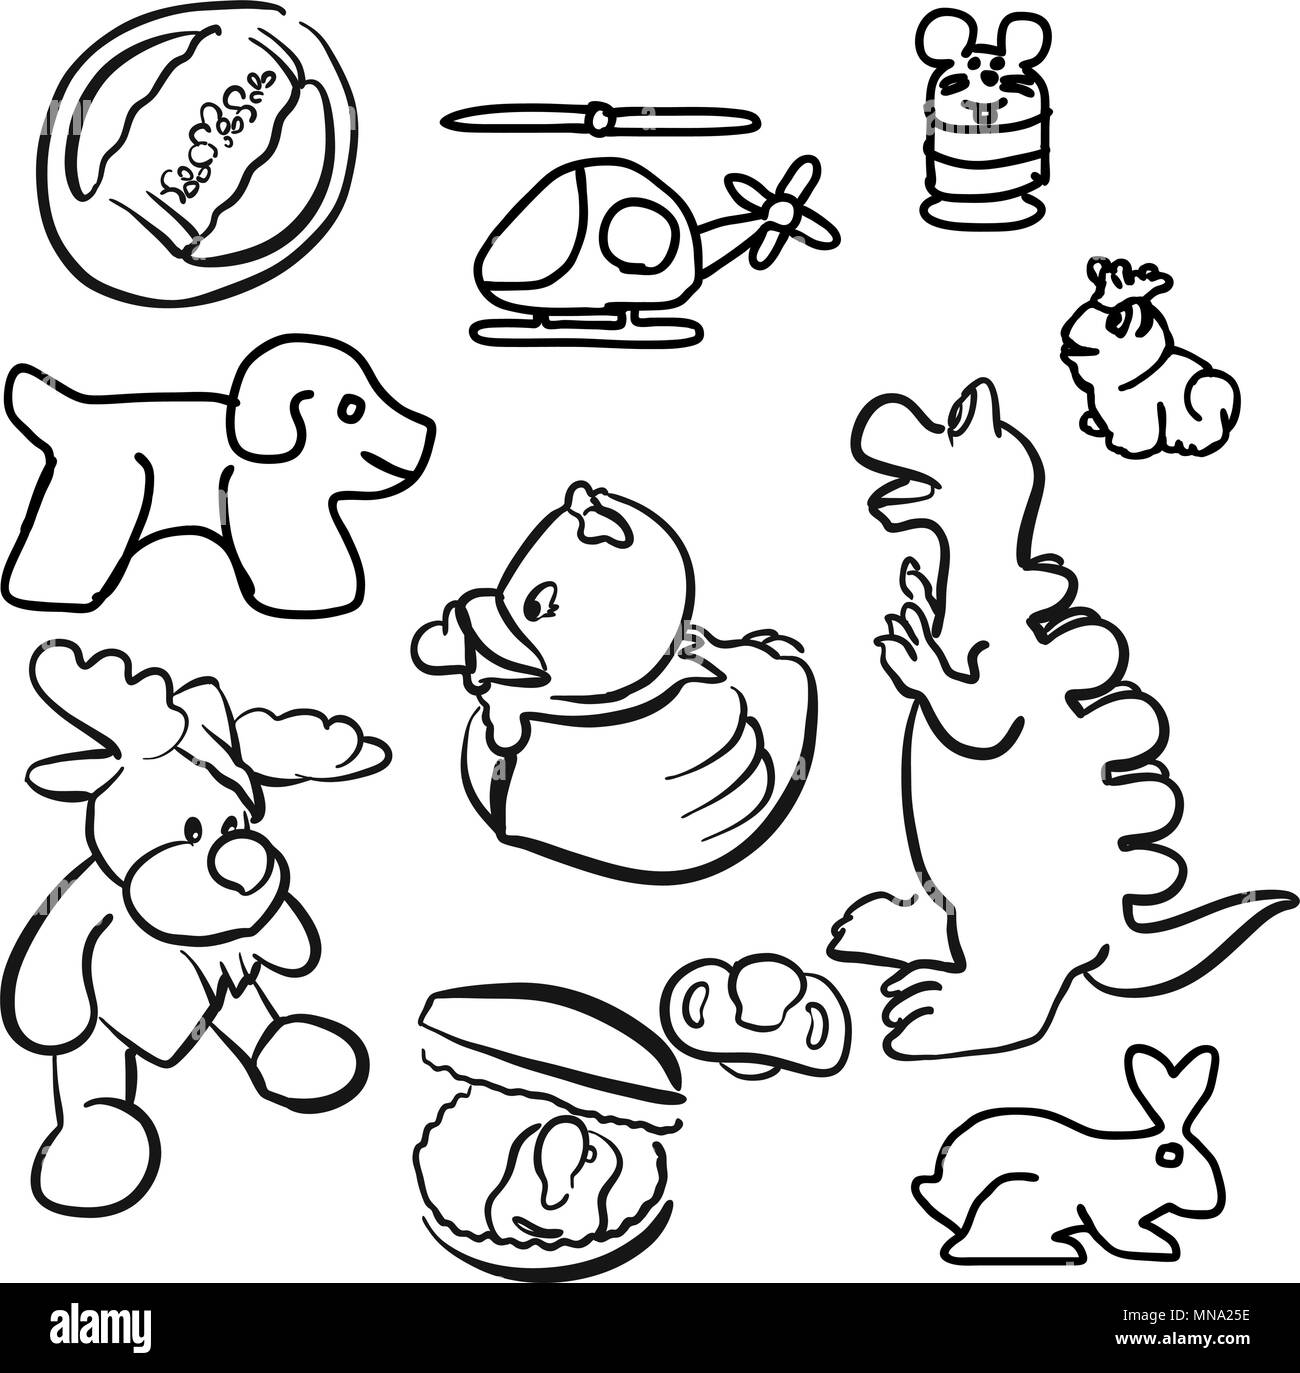 Baby Toys Outline Sketched Doodles, Vector Artwork Stock Vector